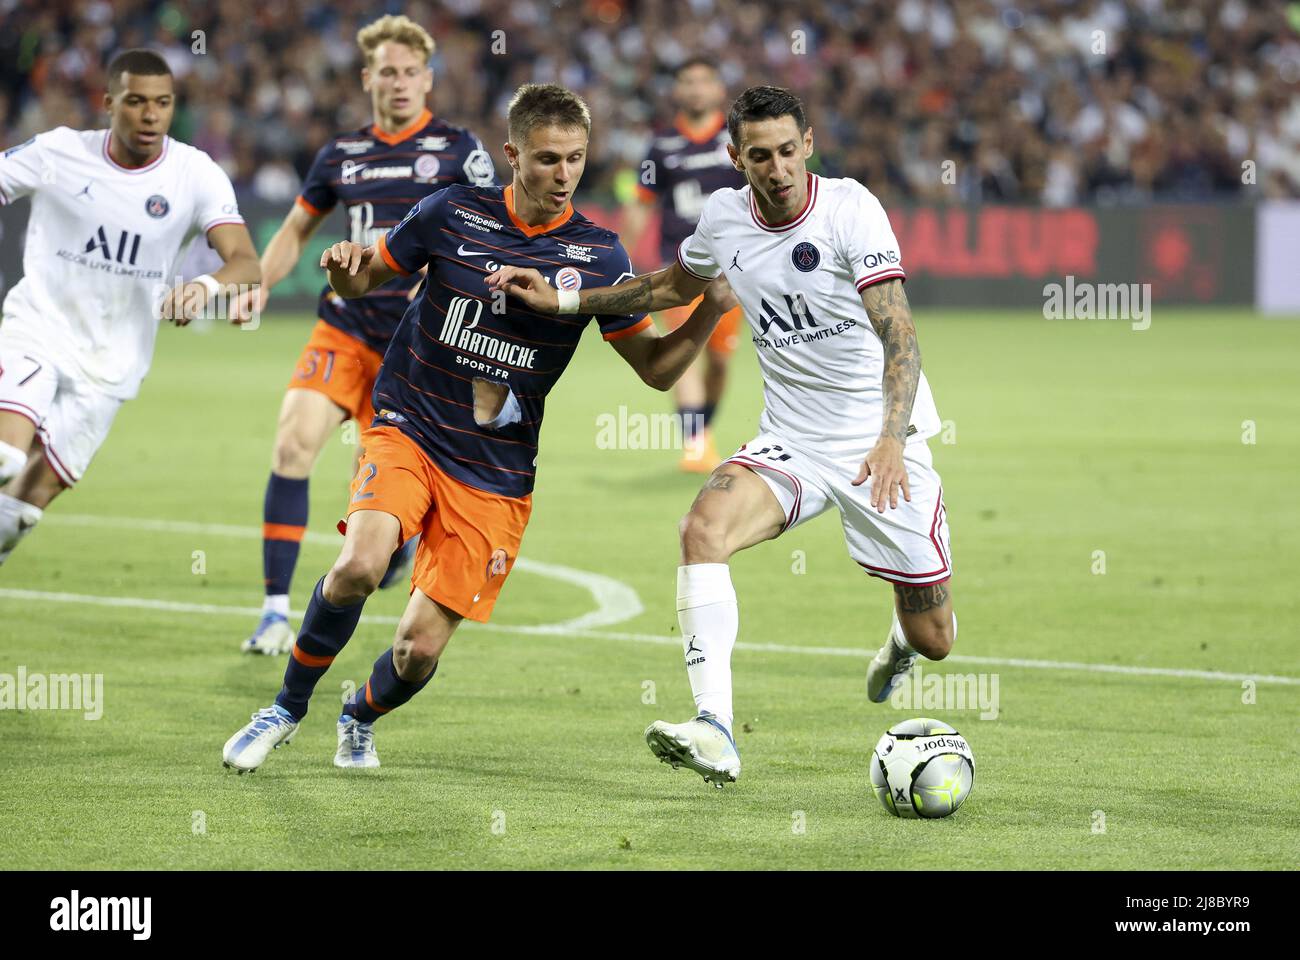 May 14, 2022, Montpellier, France: Angel Di Maria of PSG, Arnaud Souquet  Montpellier (left) during the French championship Ligue 1 football match  between Montpellier HSC and Paris Saint-Germain on May 14, 2022